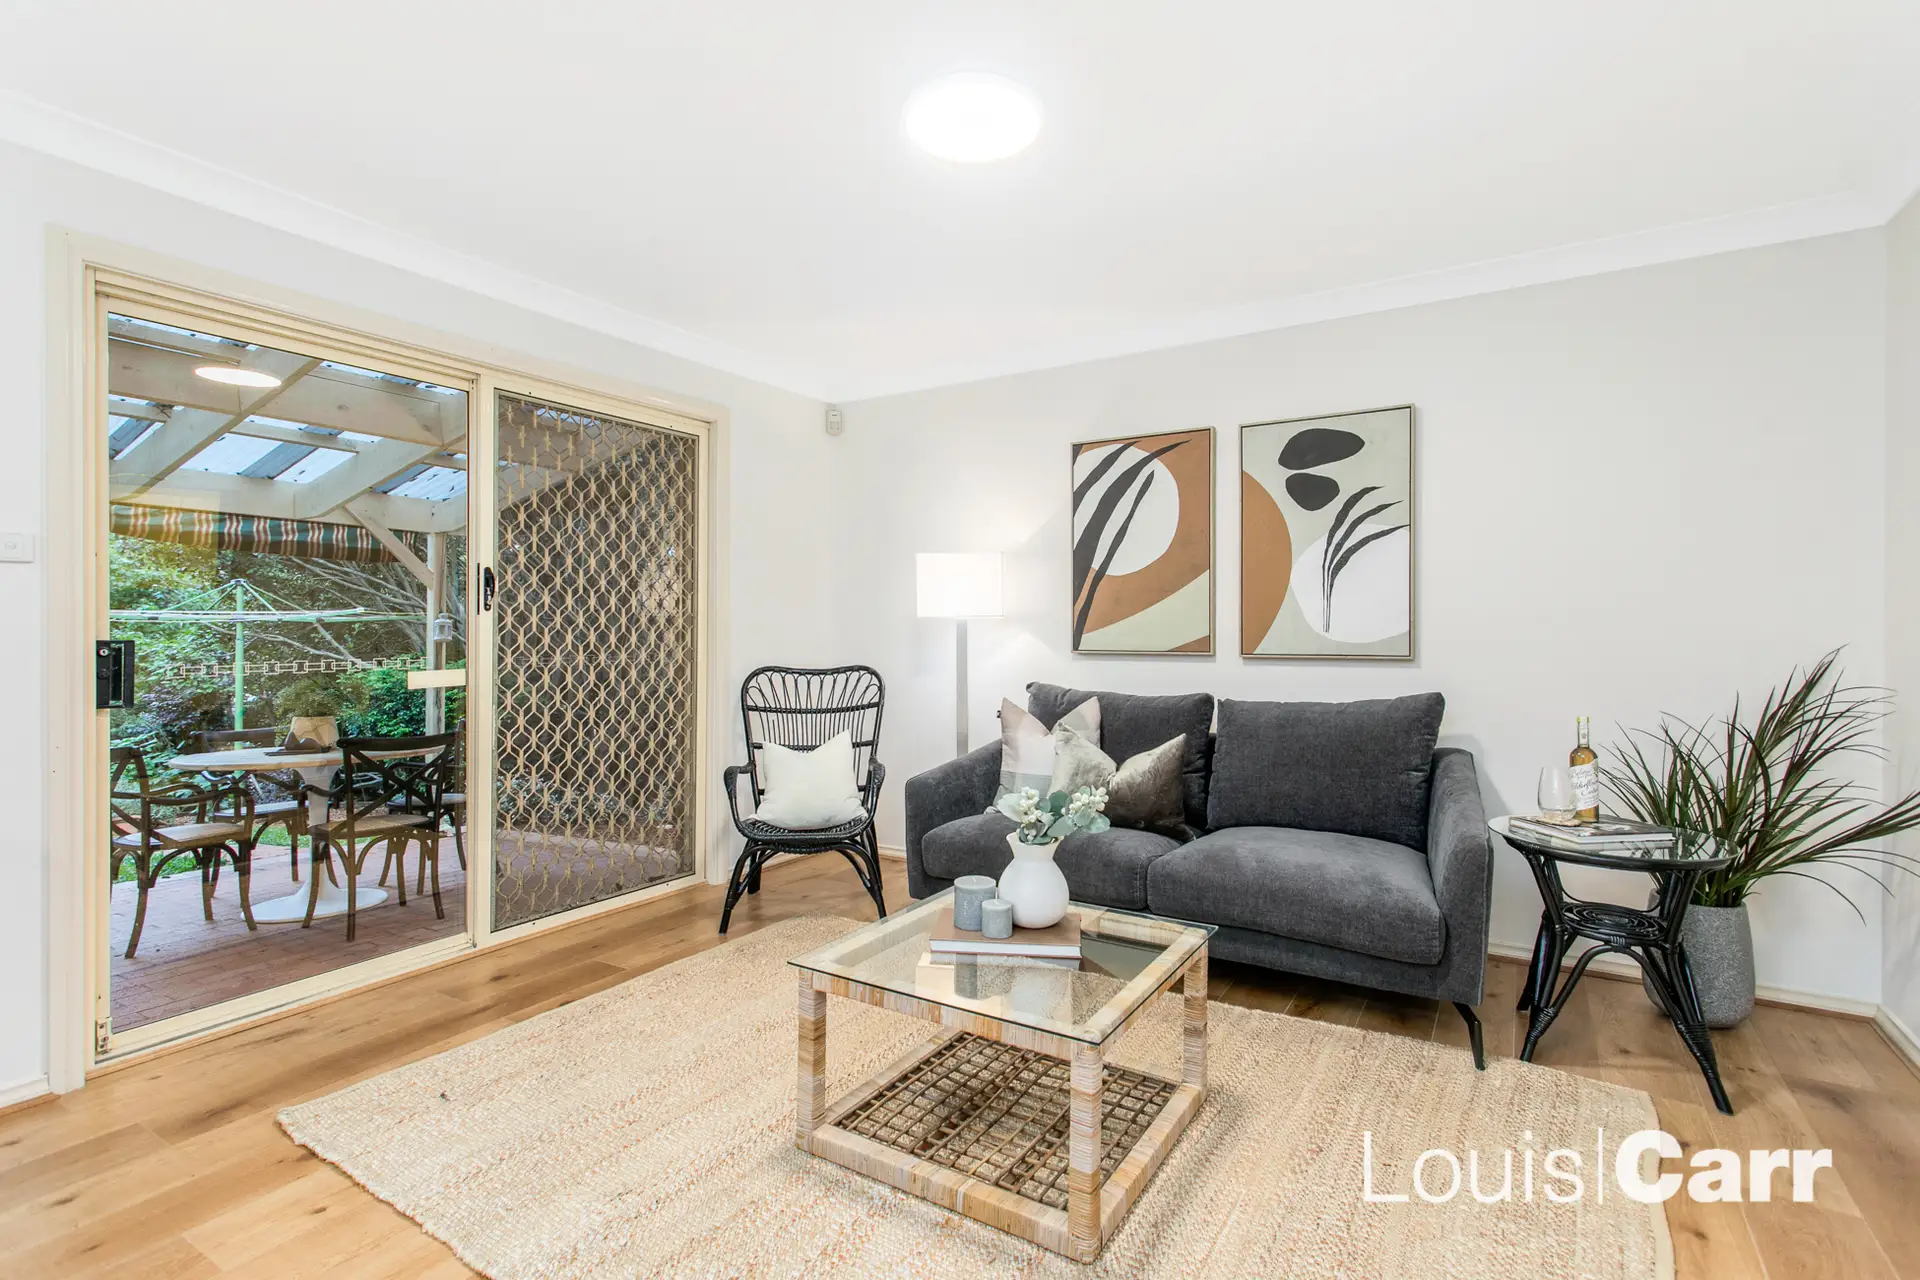 Photo #5: 52B Gray Spence Crescent, West Pennant Hills - Sold by Louis Carr Real Estate